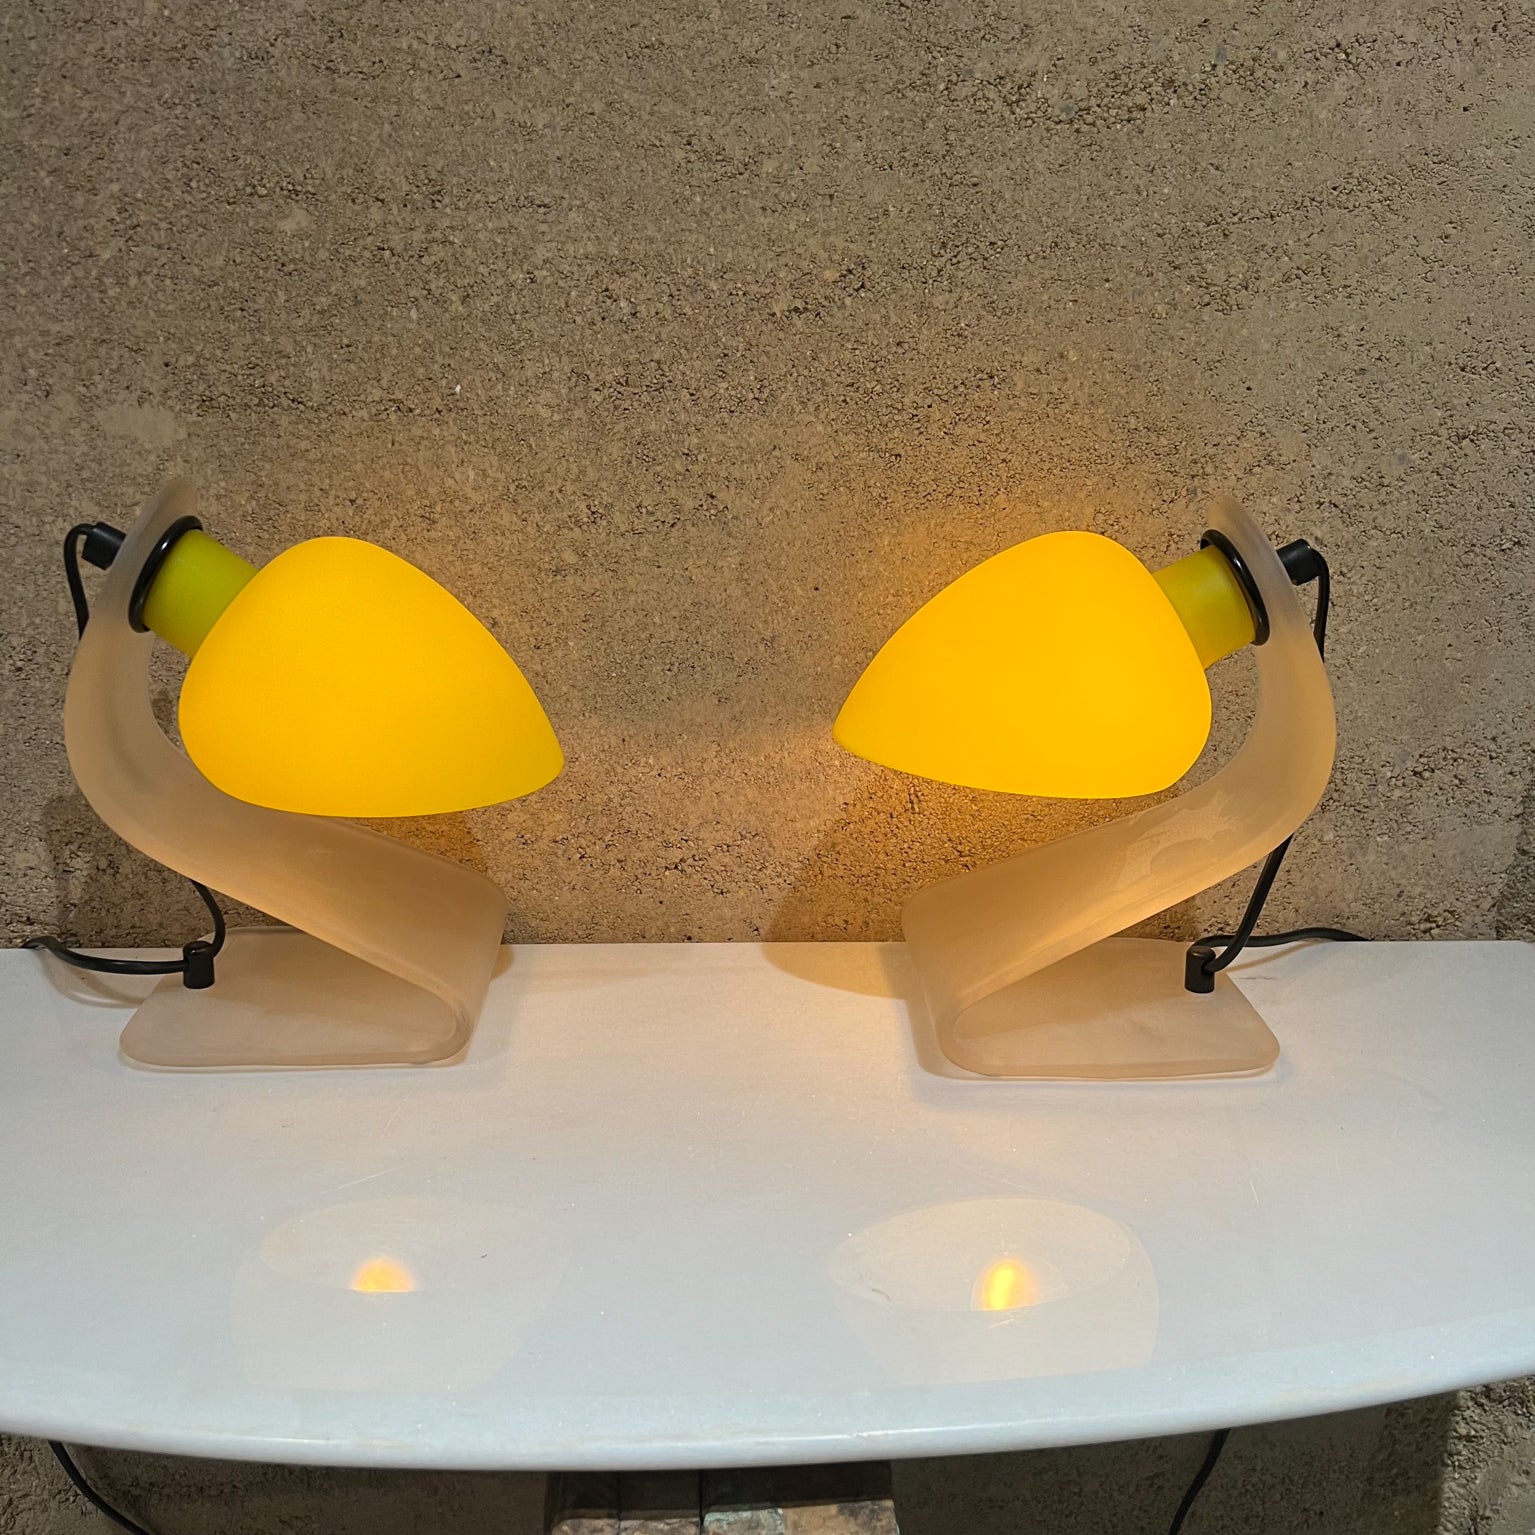 Pair of Italian glass table lamps modern clean design.
Frosted glass base contrasts with yellow shade.
Measures: 8.5 tall x 5.13 W x 7.38 D.
Unmarked Italy 1950s.
Tested and working. Preowned original vintage condition.
See images